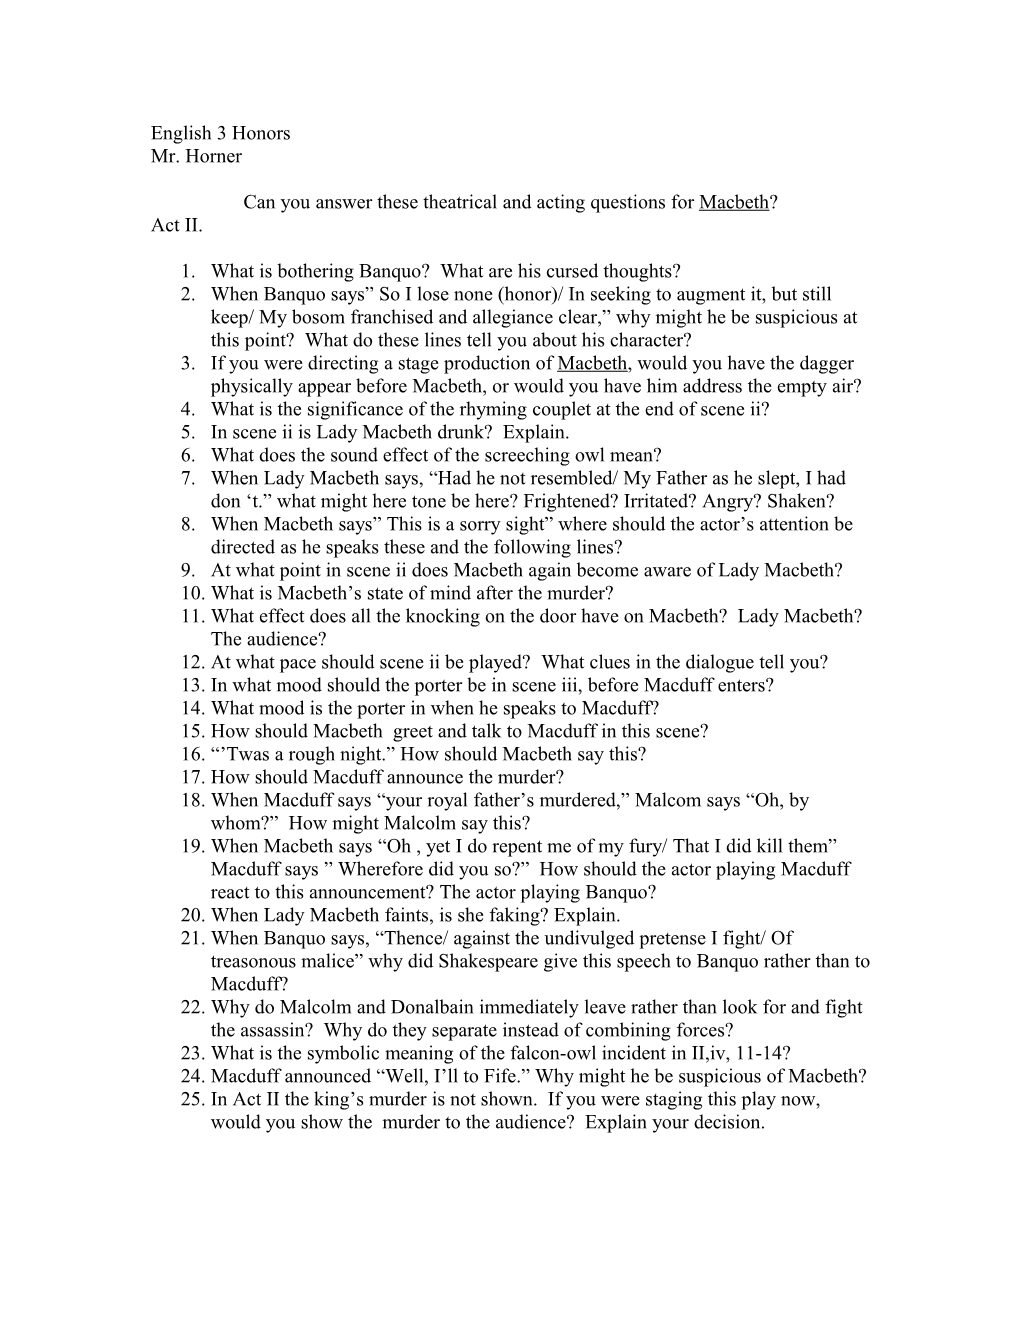 Can You Answer These Theatrical and Acting Questions for Macbeth?